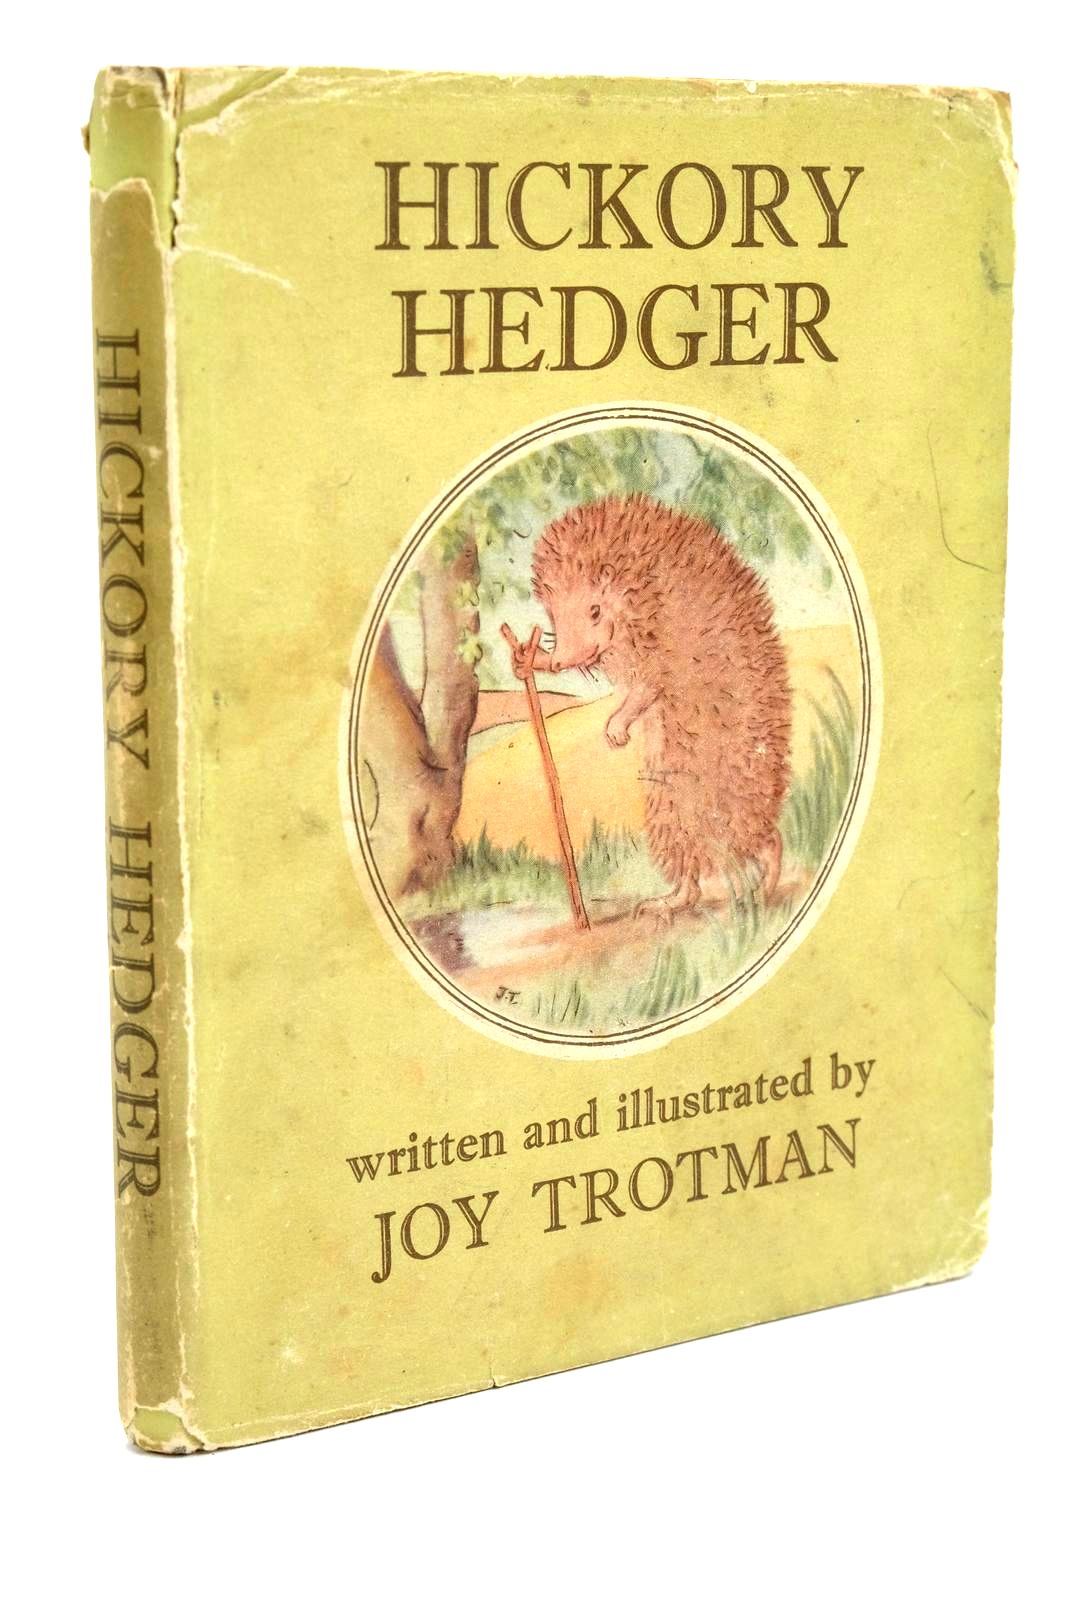 Photo of HICKORY HEDGER written by Trotman, Joy illustrated by Trotman, Joy published by The Epworth Press (STOCK CODE: 1321684)  for sale by Stella & Rose's Books